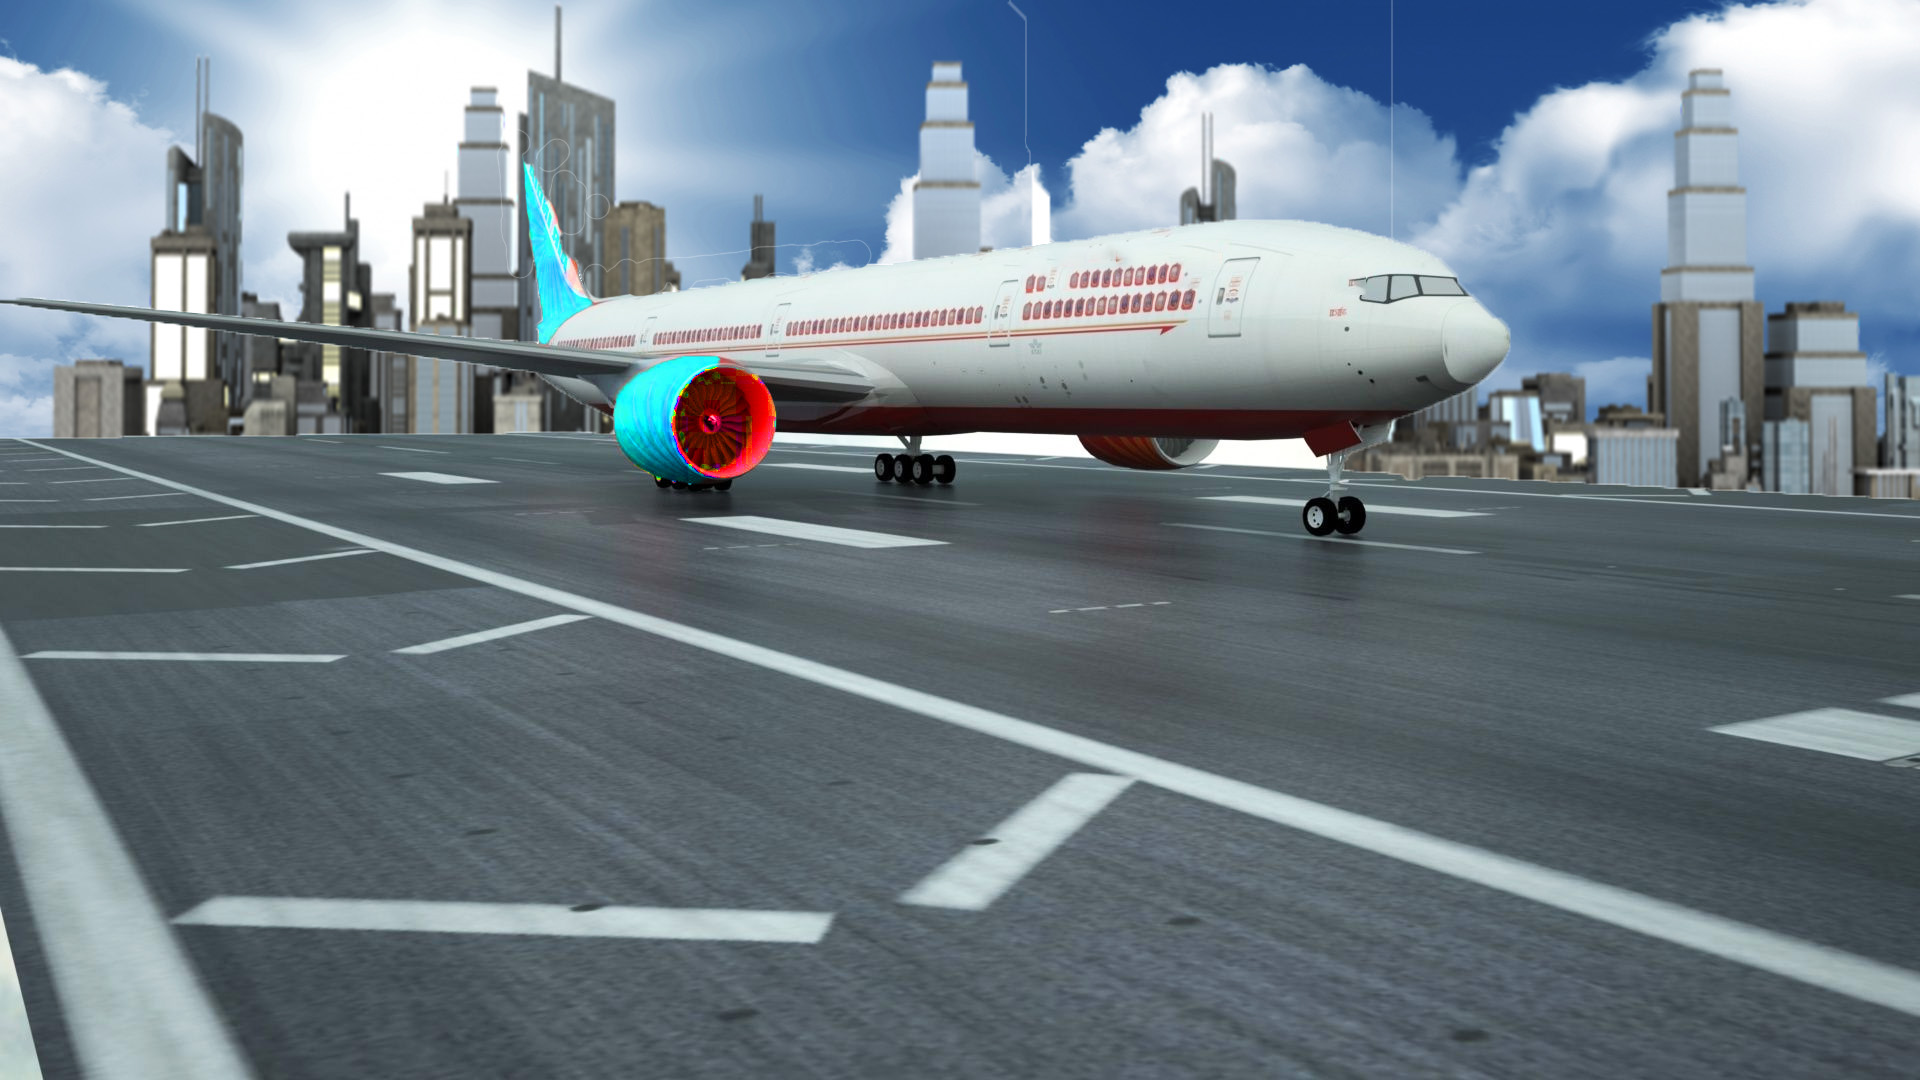 Download Real Plane Flying Simulator on PC with MEmu